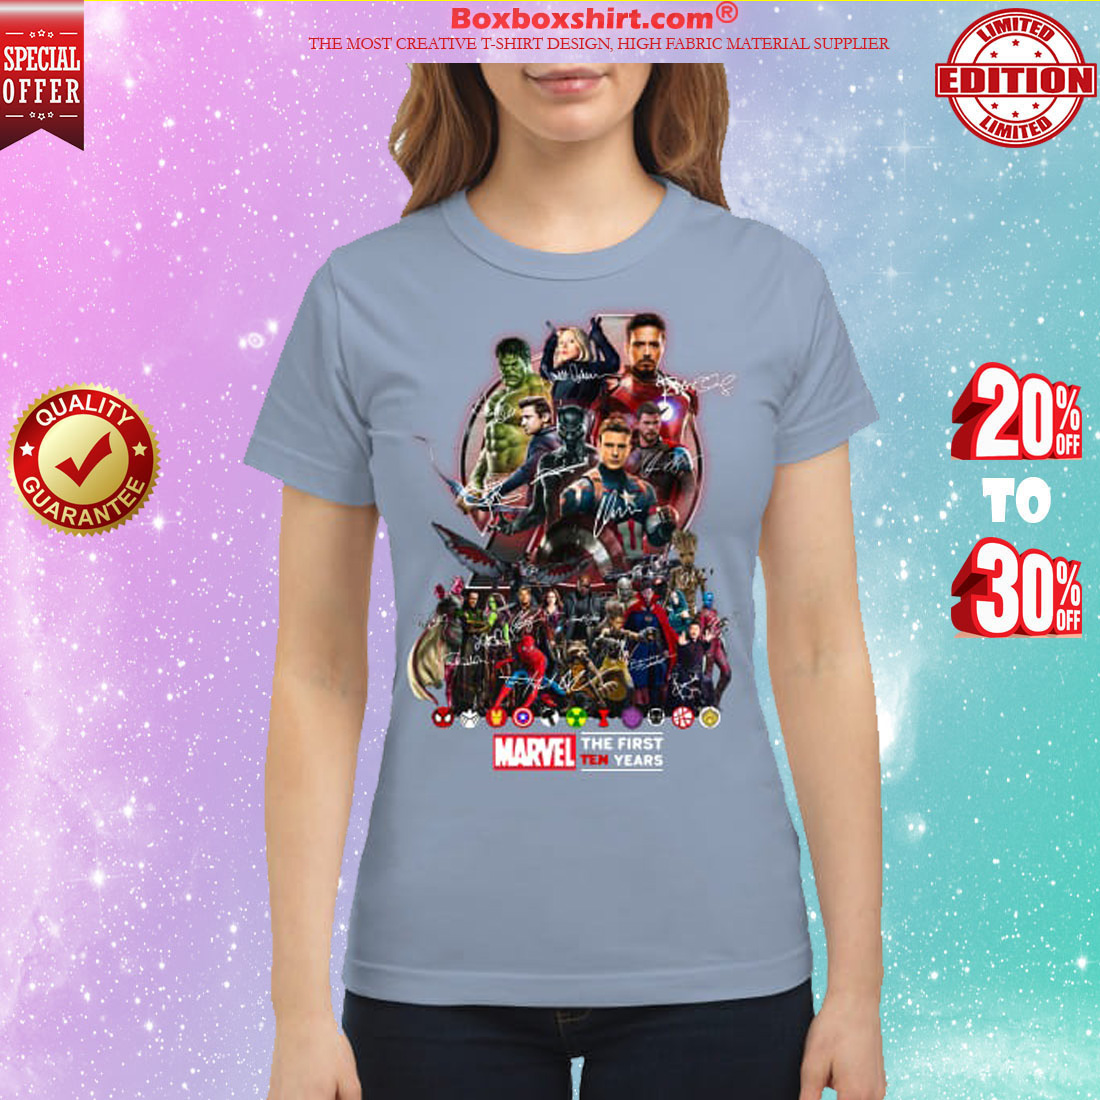 Marvel Avengers The first ten years classic shirt